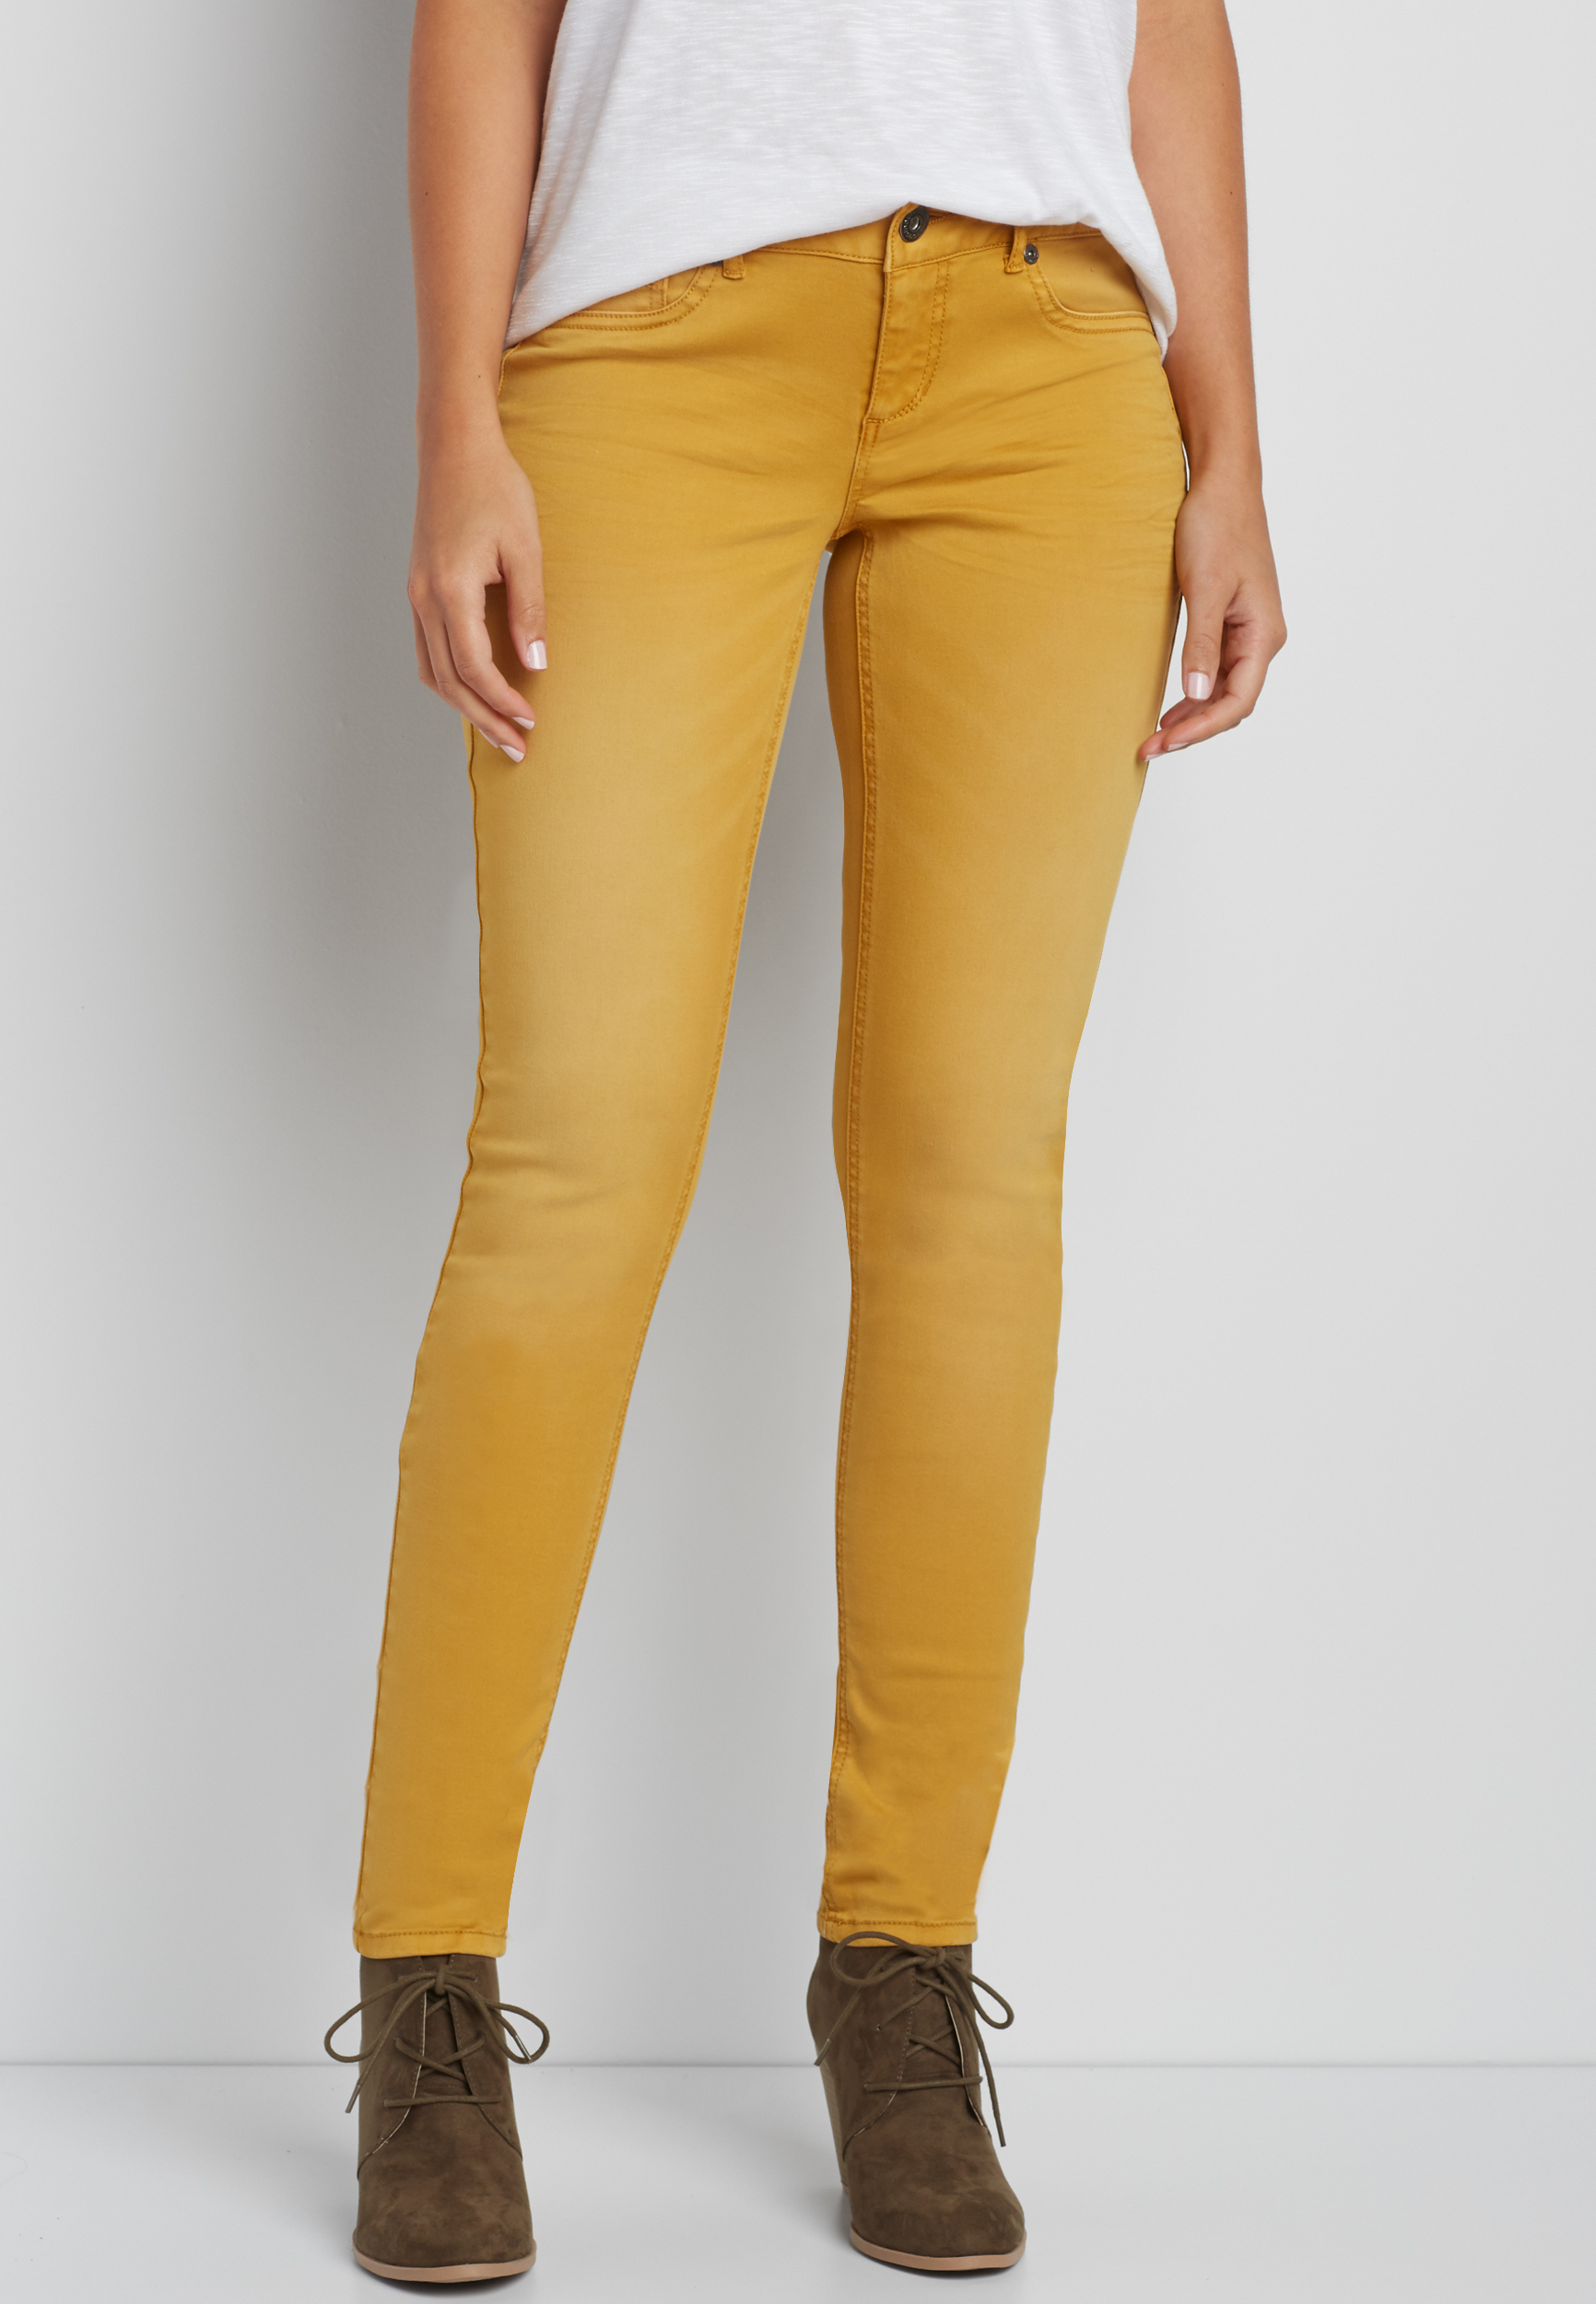 mustard colored jeggings